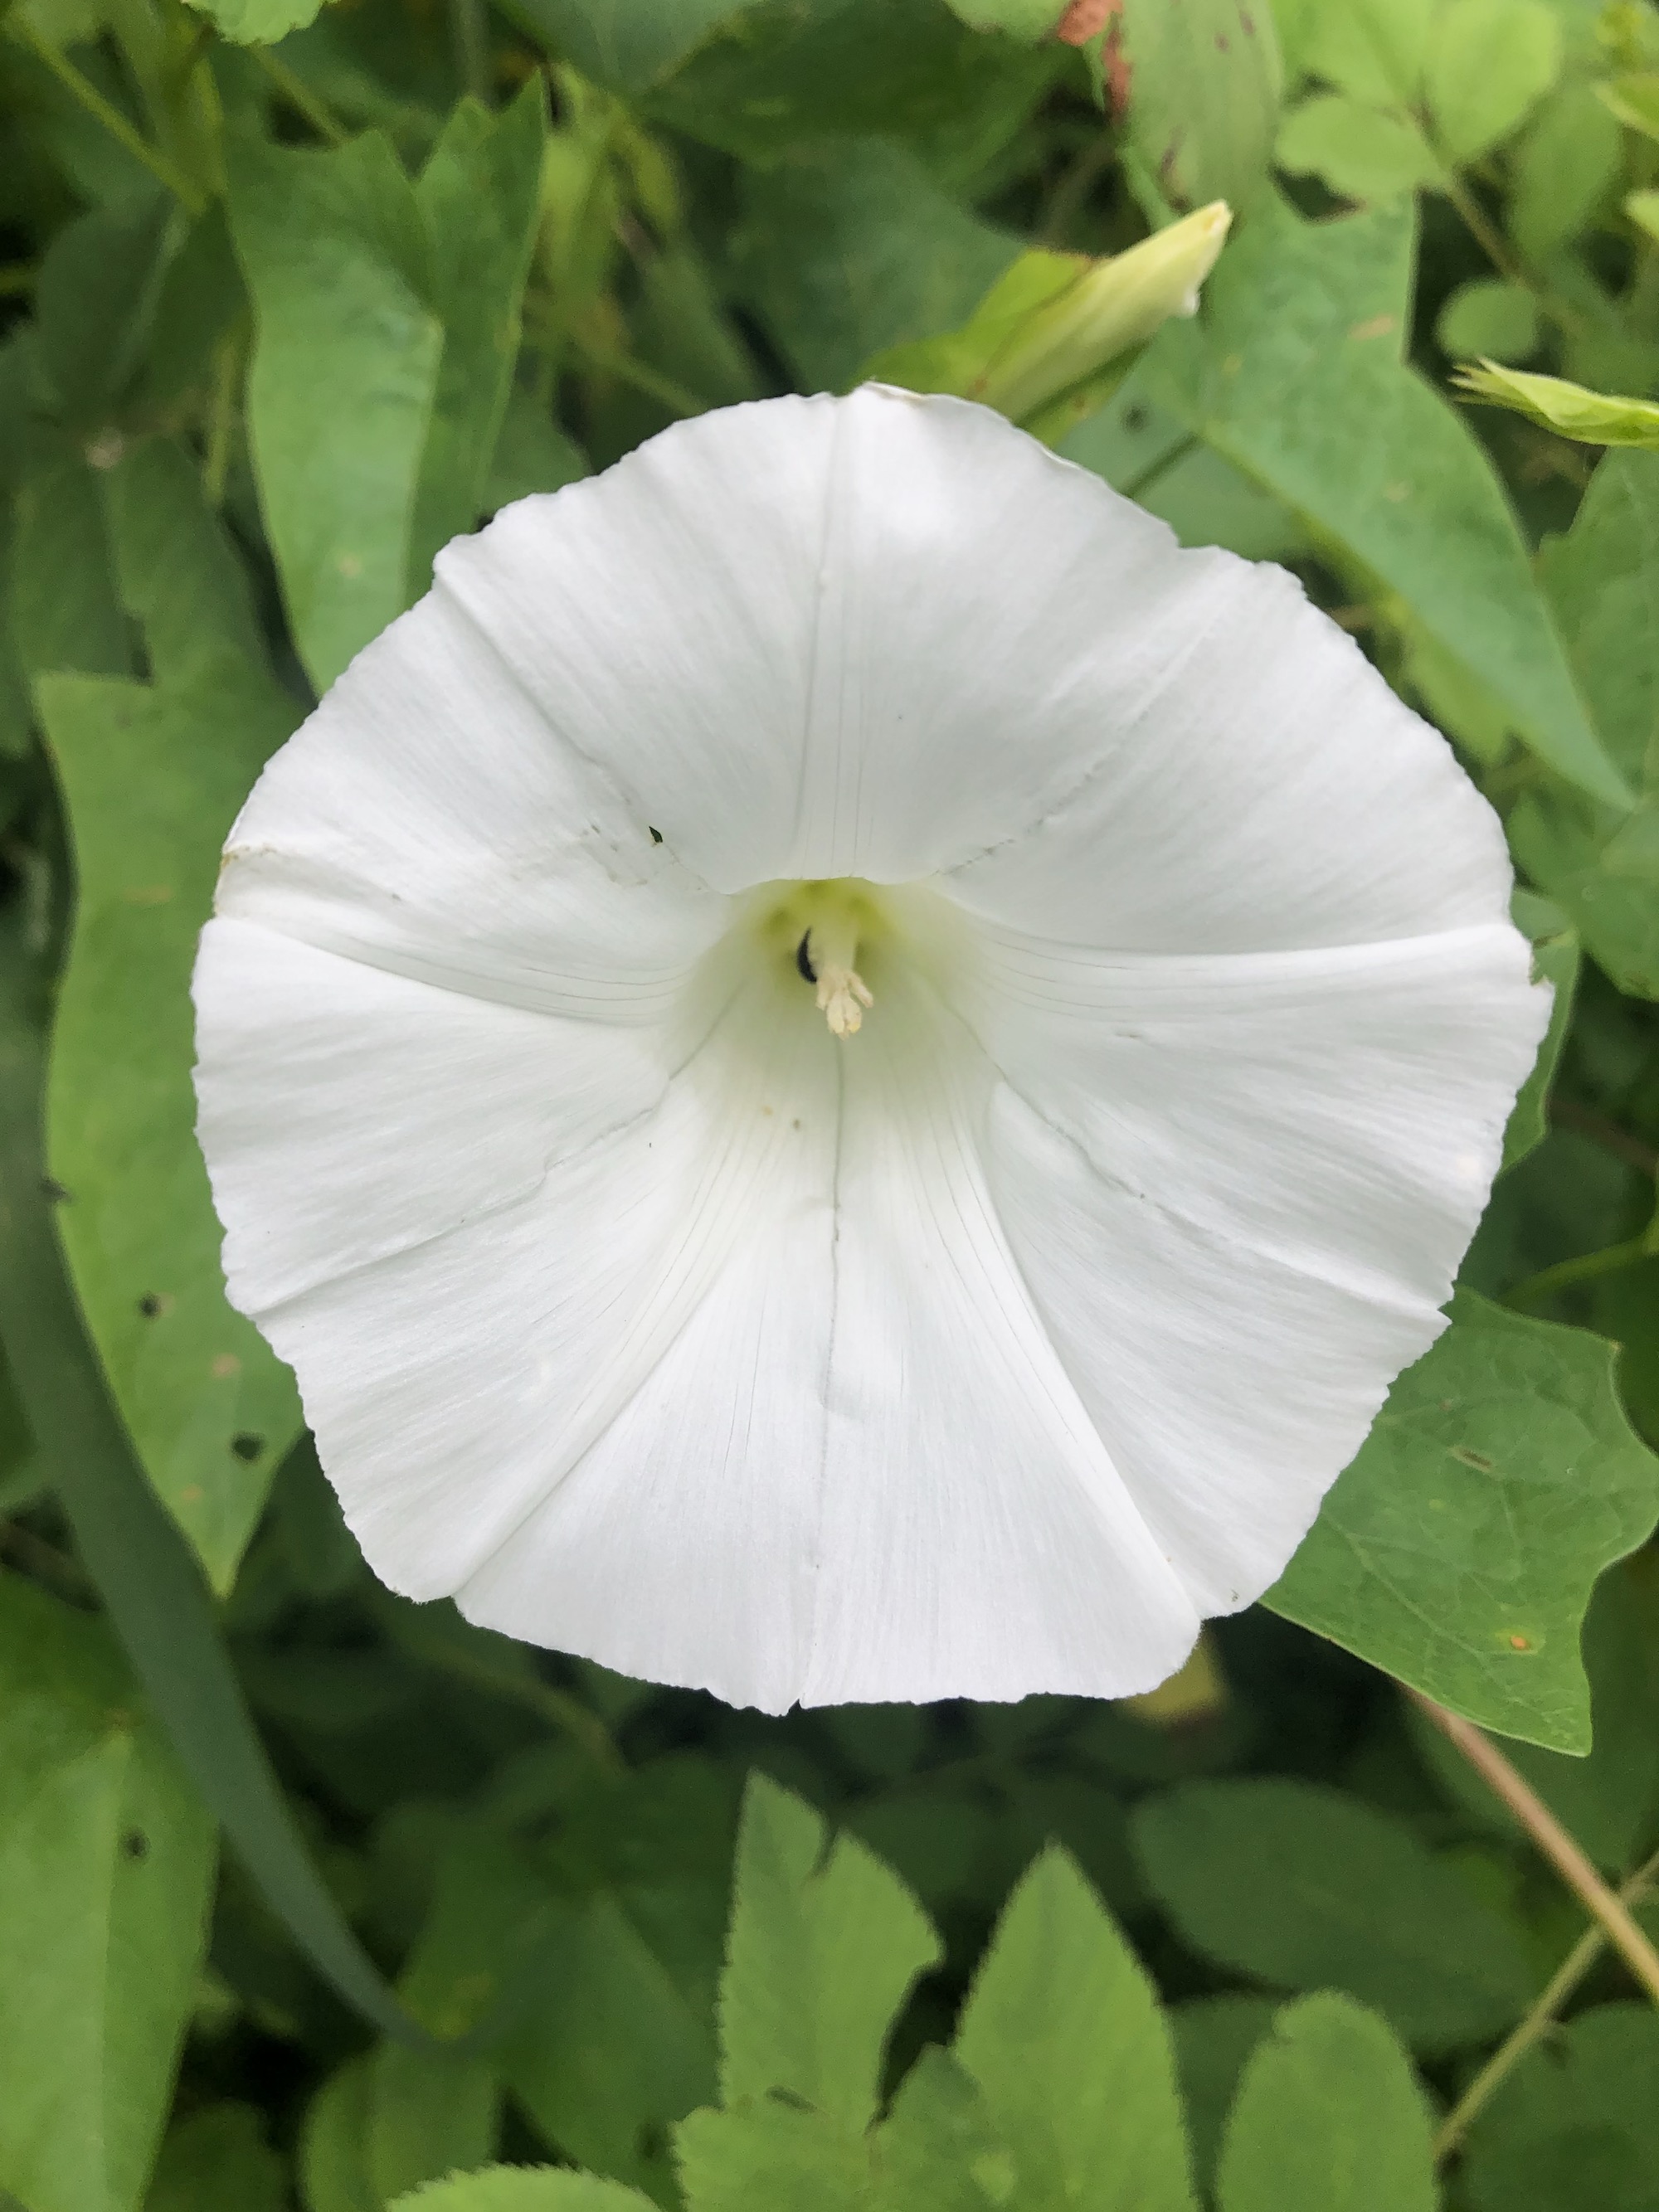 Hedge Bindweed on shore of Marion Dunn Pond in Madison, Wisconsin on June 29, 2020.